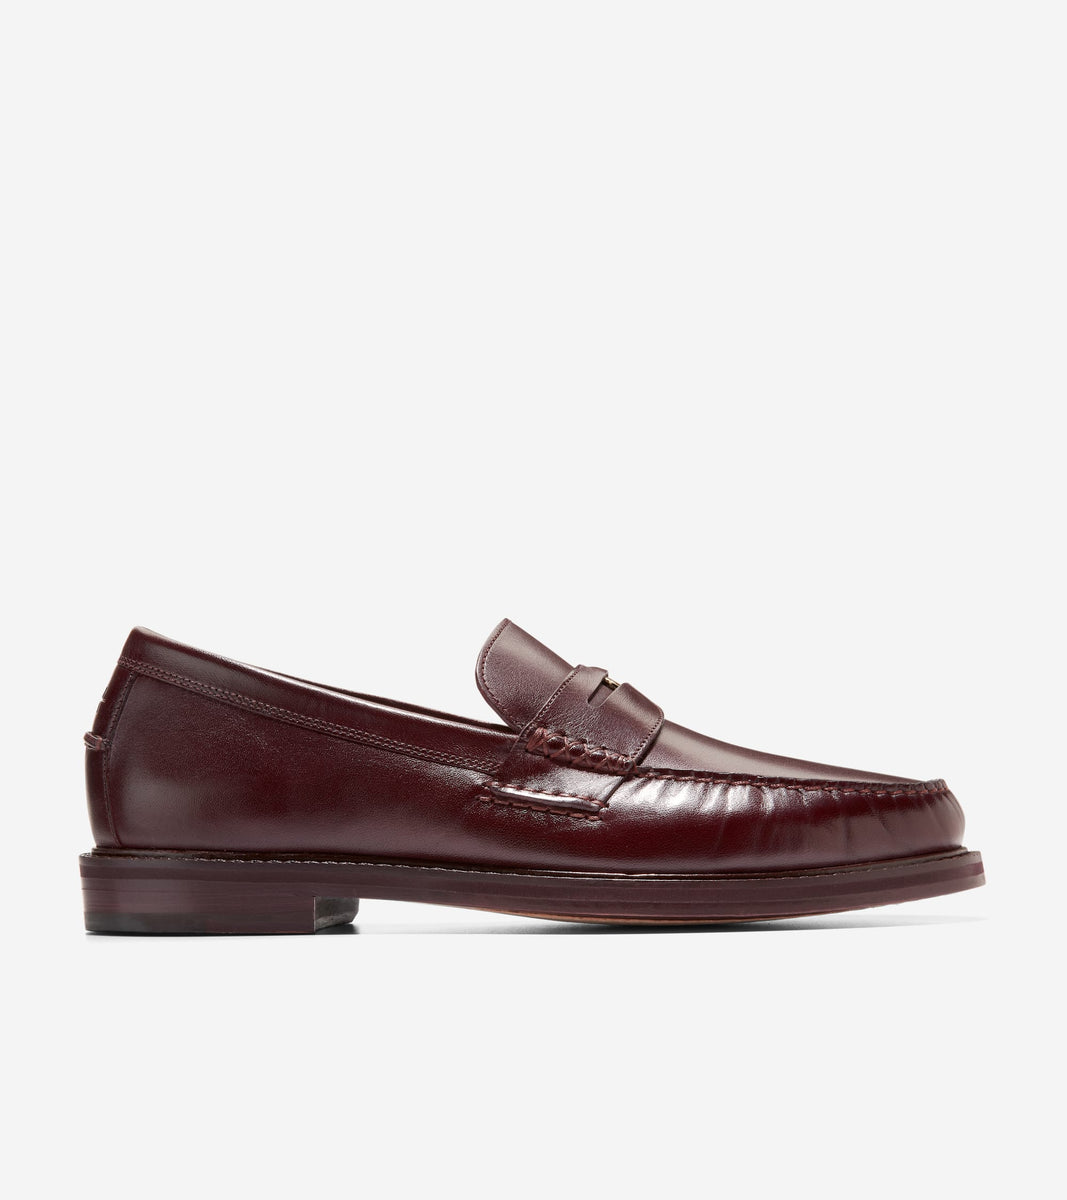 Cole Haan Men's American Classic Lug Sole Penny Loafers